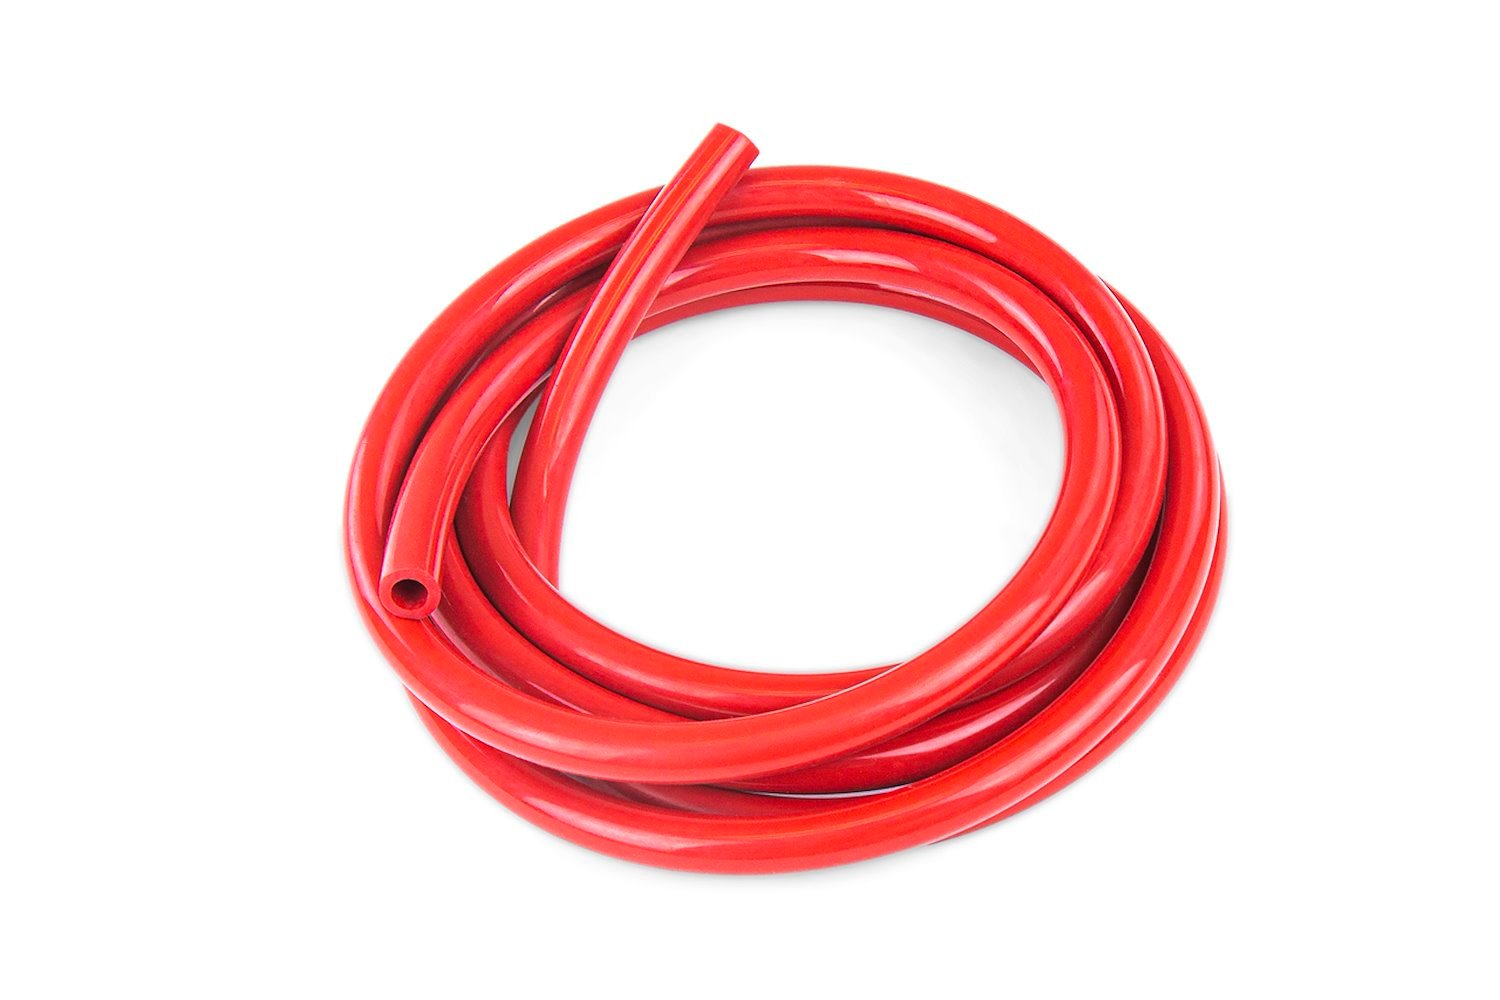 HTSVH2-REDx10 High-Temperature Silicone Vacuum Hose Tubing, 5/64 in. ID, 10 ft. Roll, Red